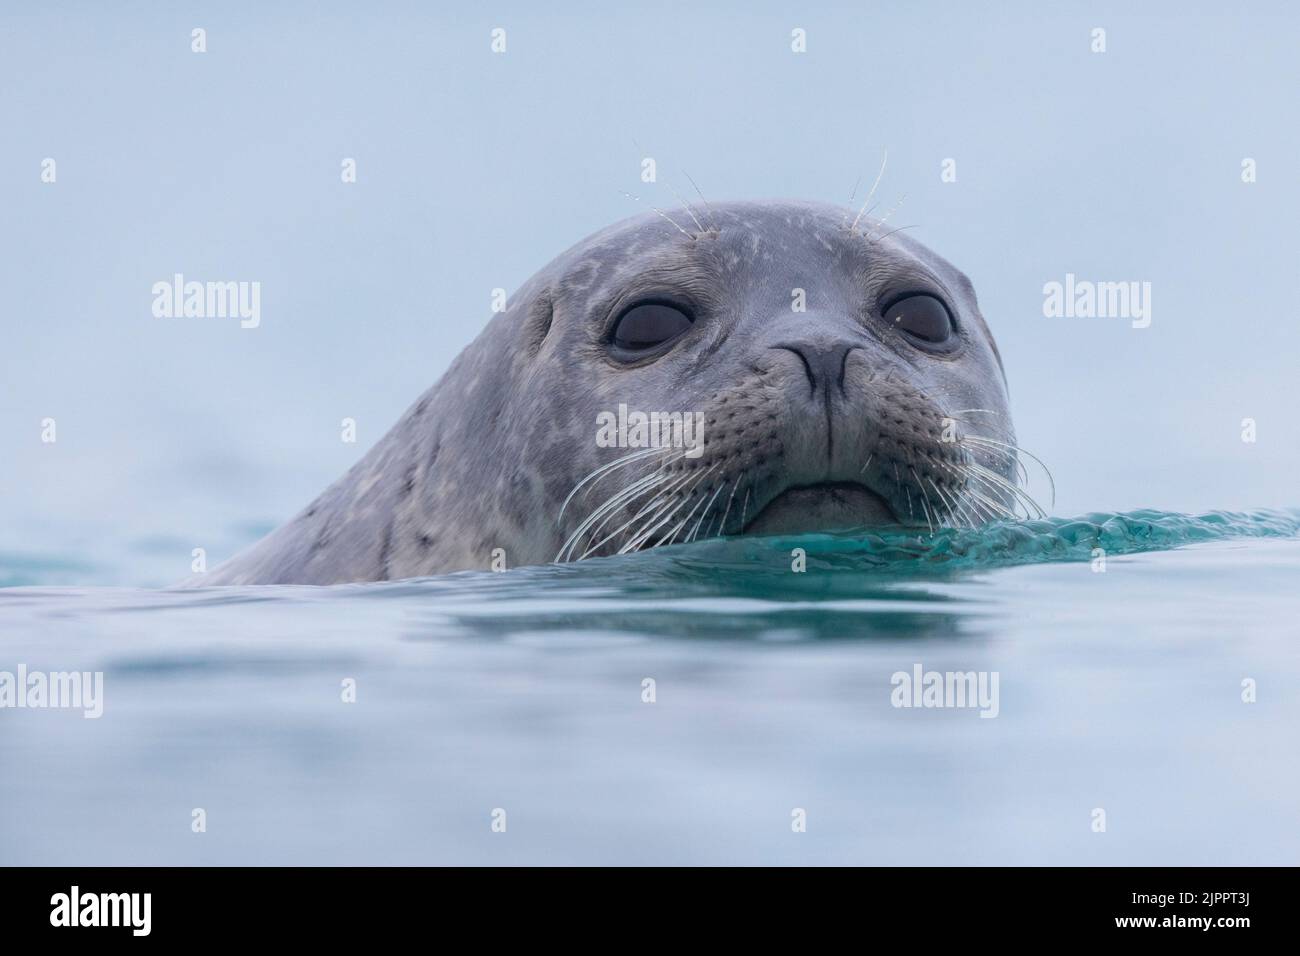 Harbour Seal (Phoca vitulina), close-up of an adult, Southern region, Iceland Stock Photo